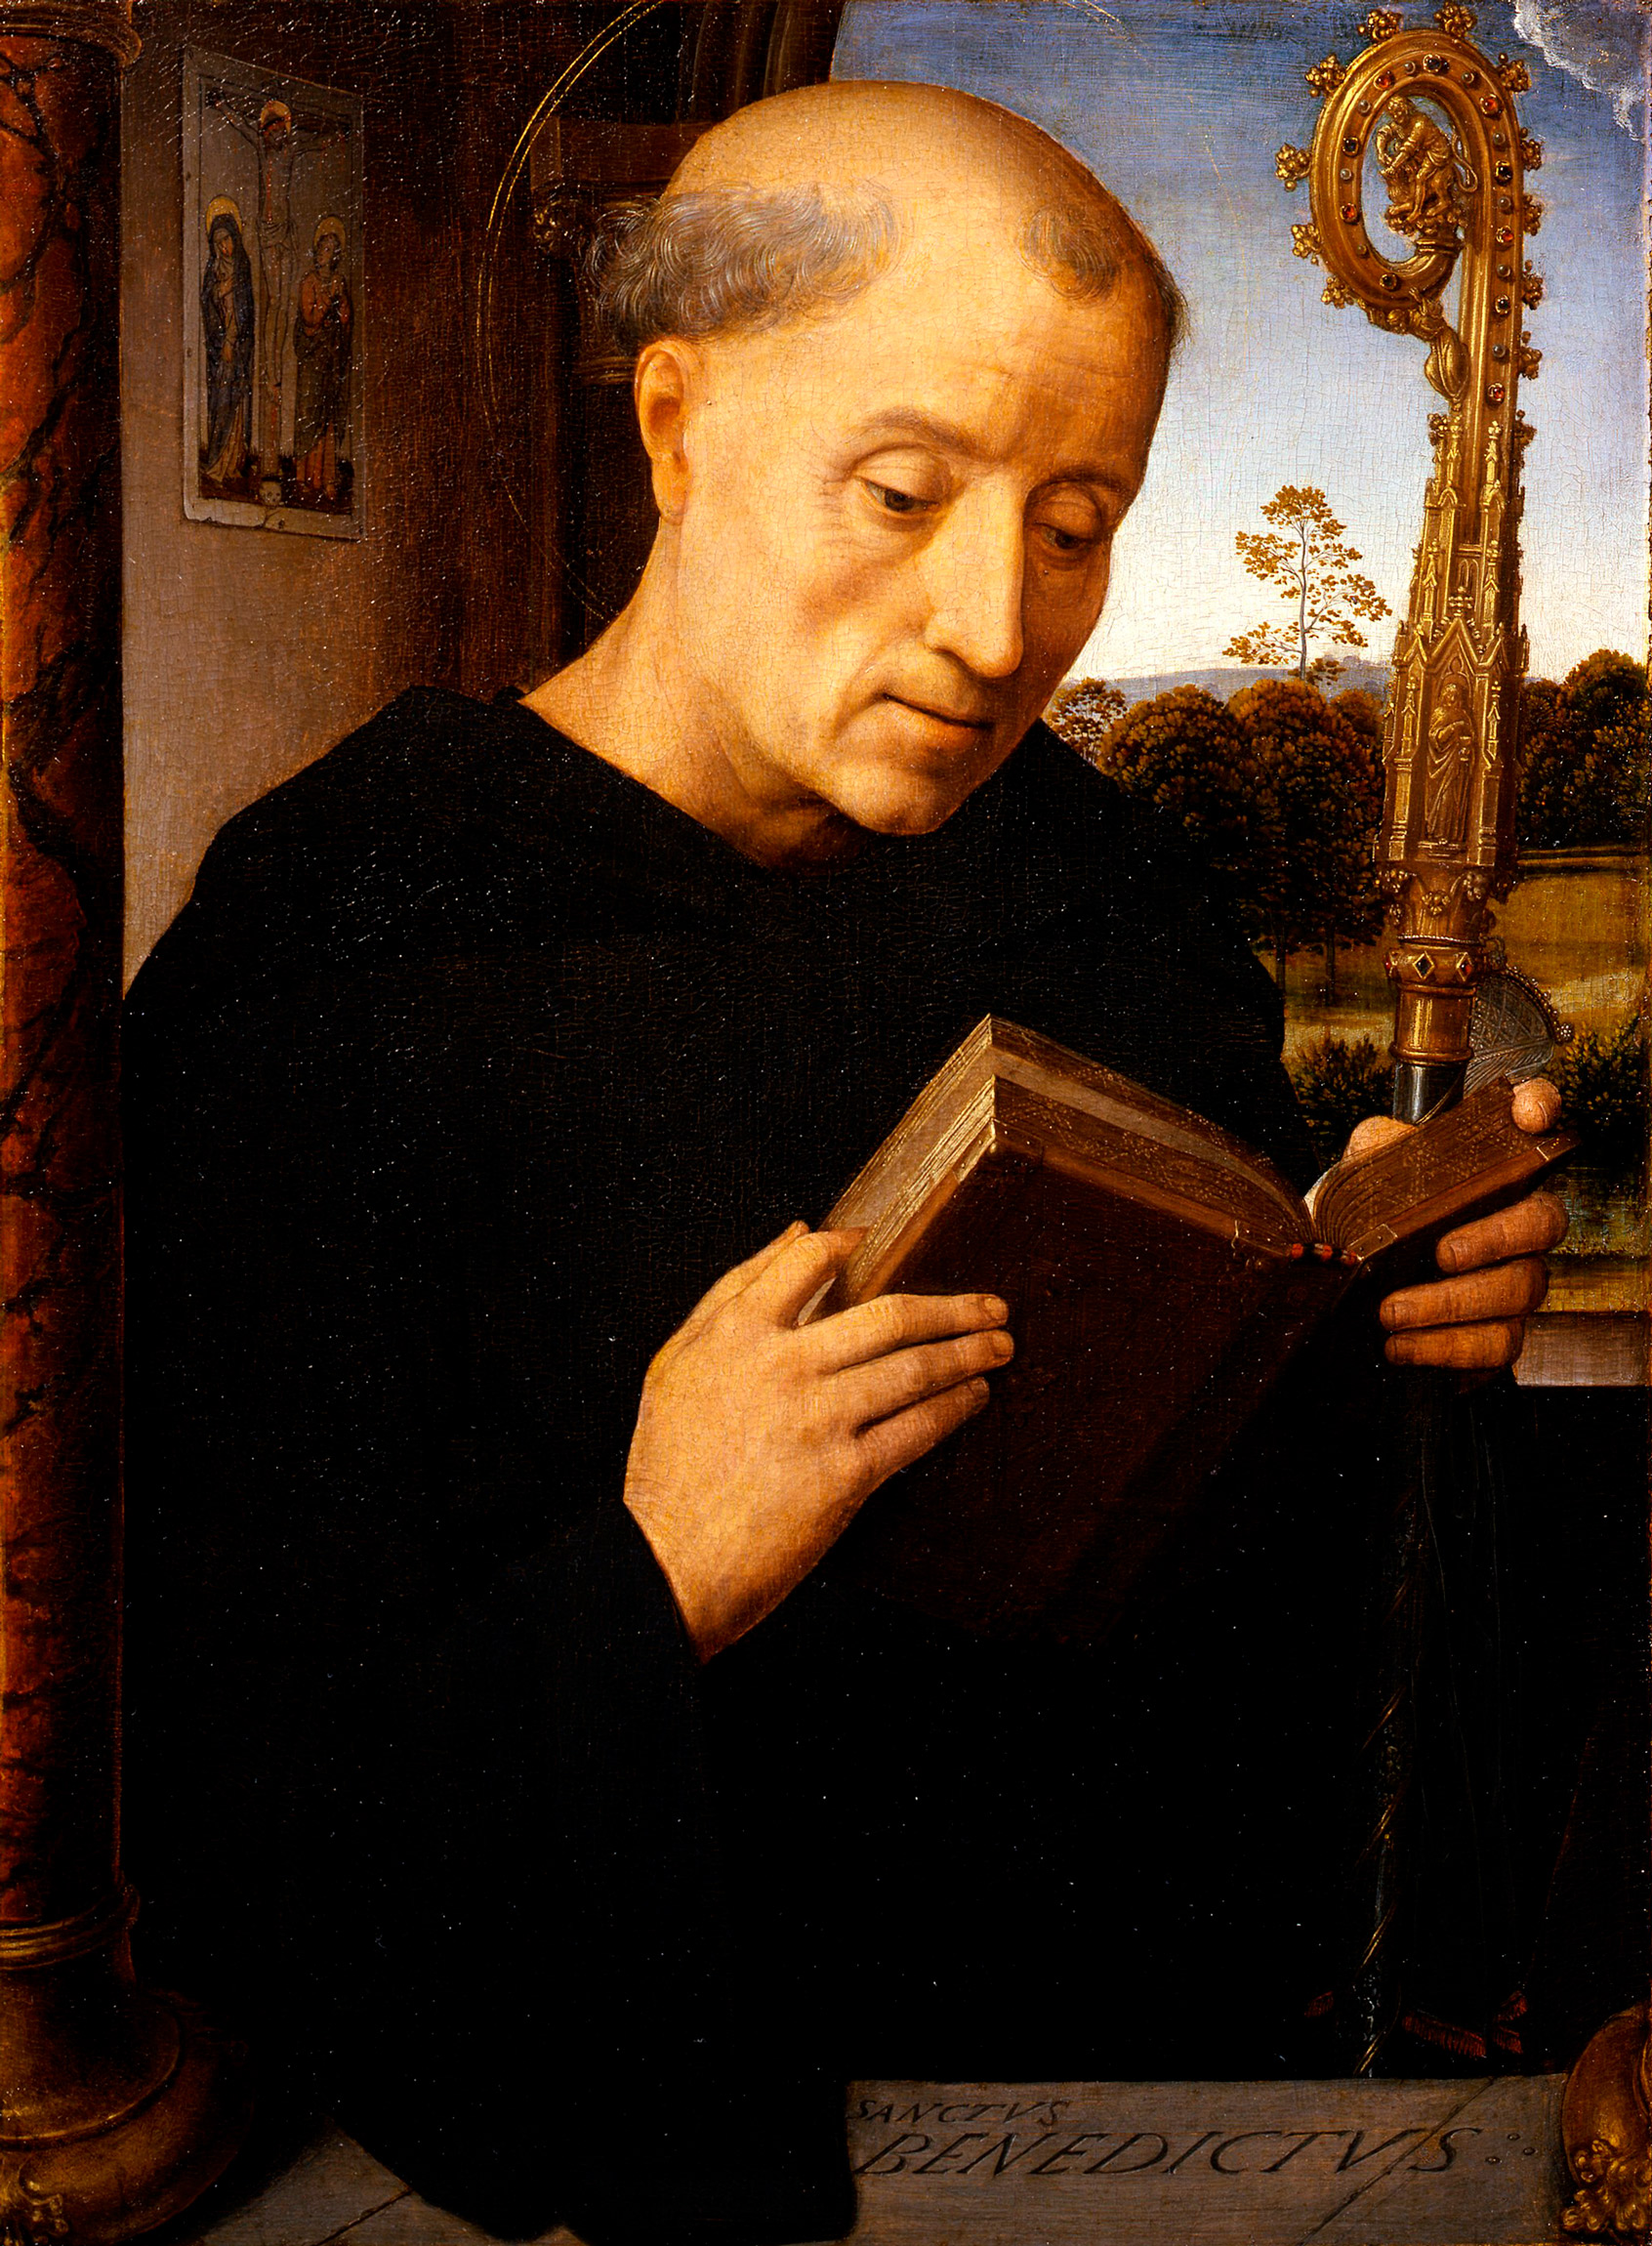 Hans Memling. Portrait of a young man praying from the Thyssen-Bornemisza National Museum